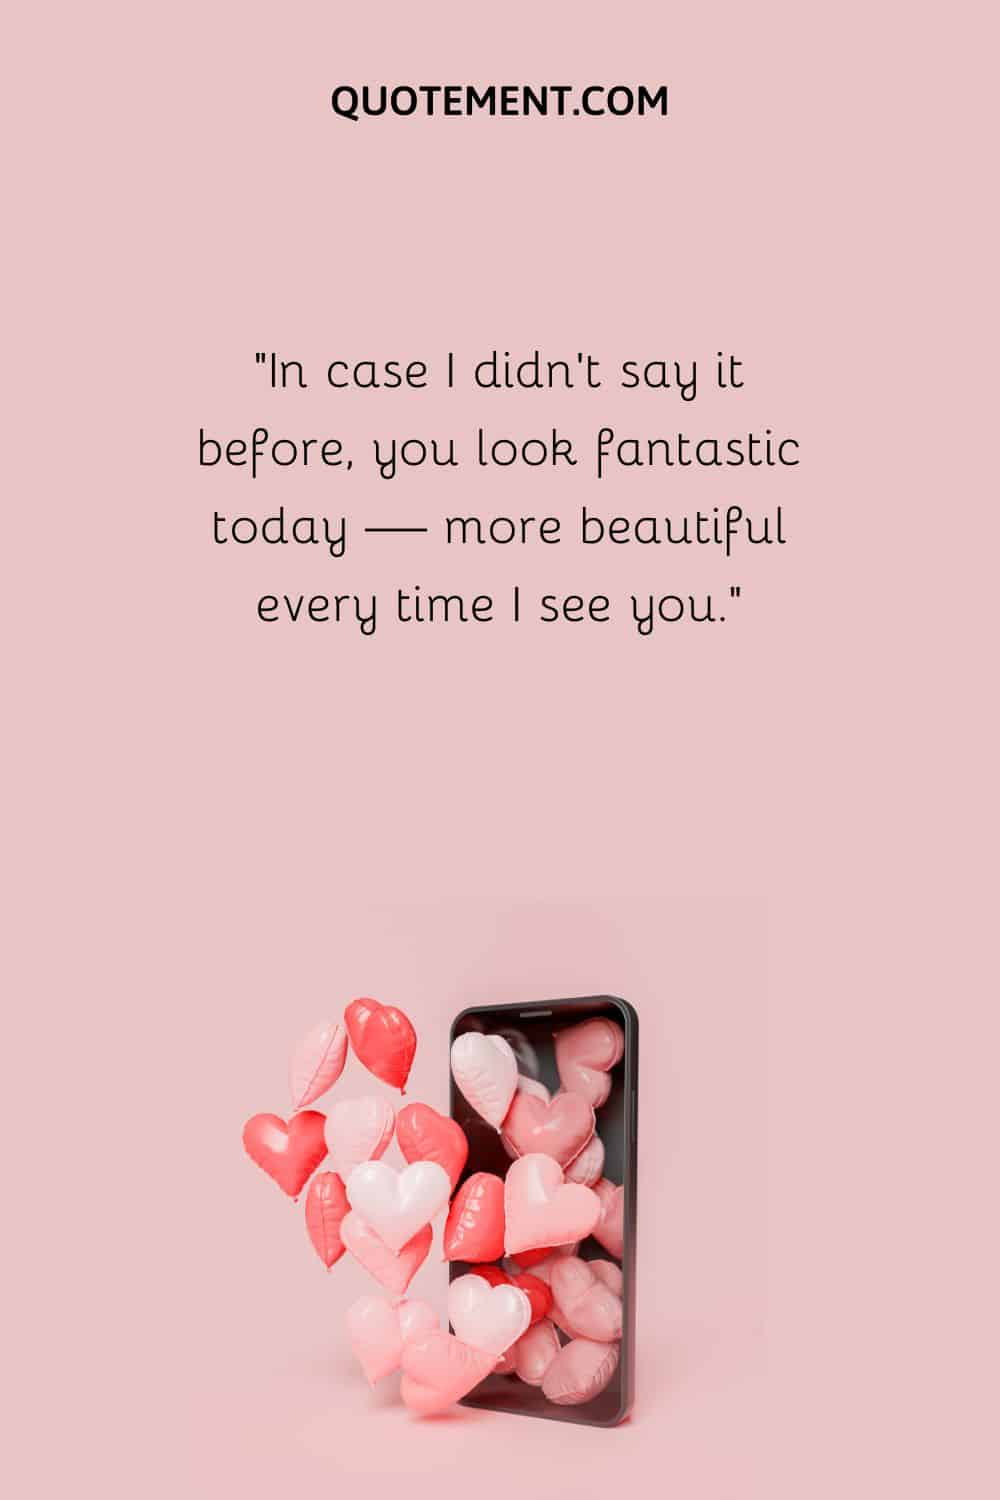 “In case I didn’t say it before, you look fantastic today — more beautiful every time I see you.”